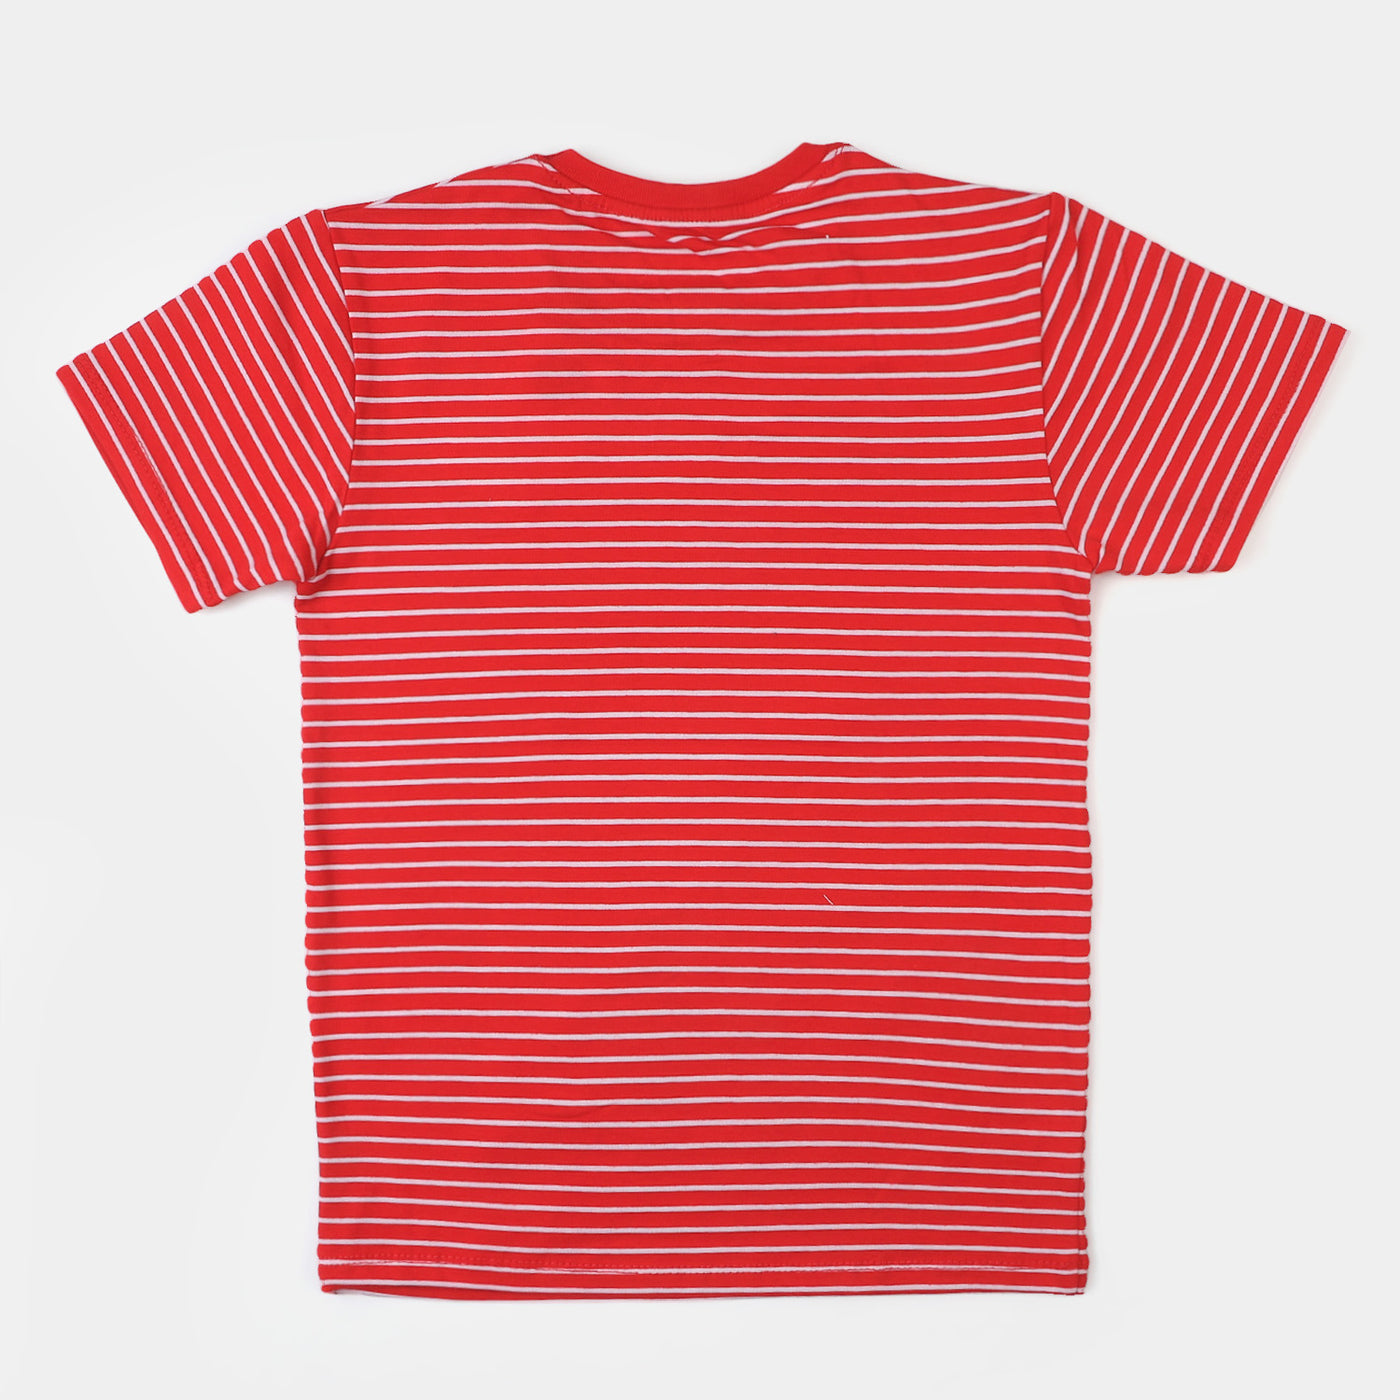 Boys Cotton T-Shirt Character - Red Stripe